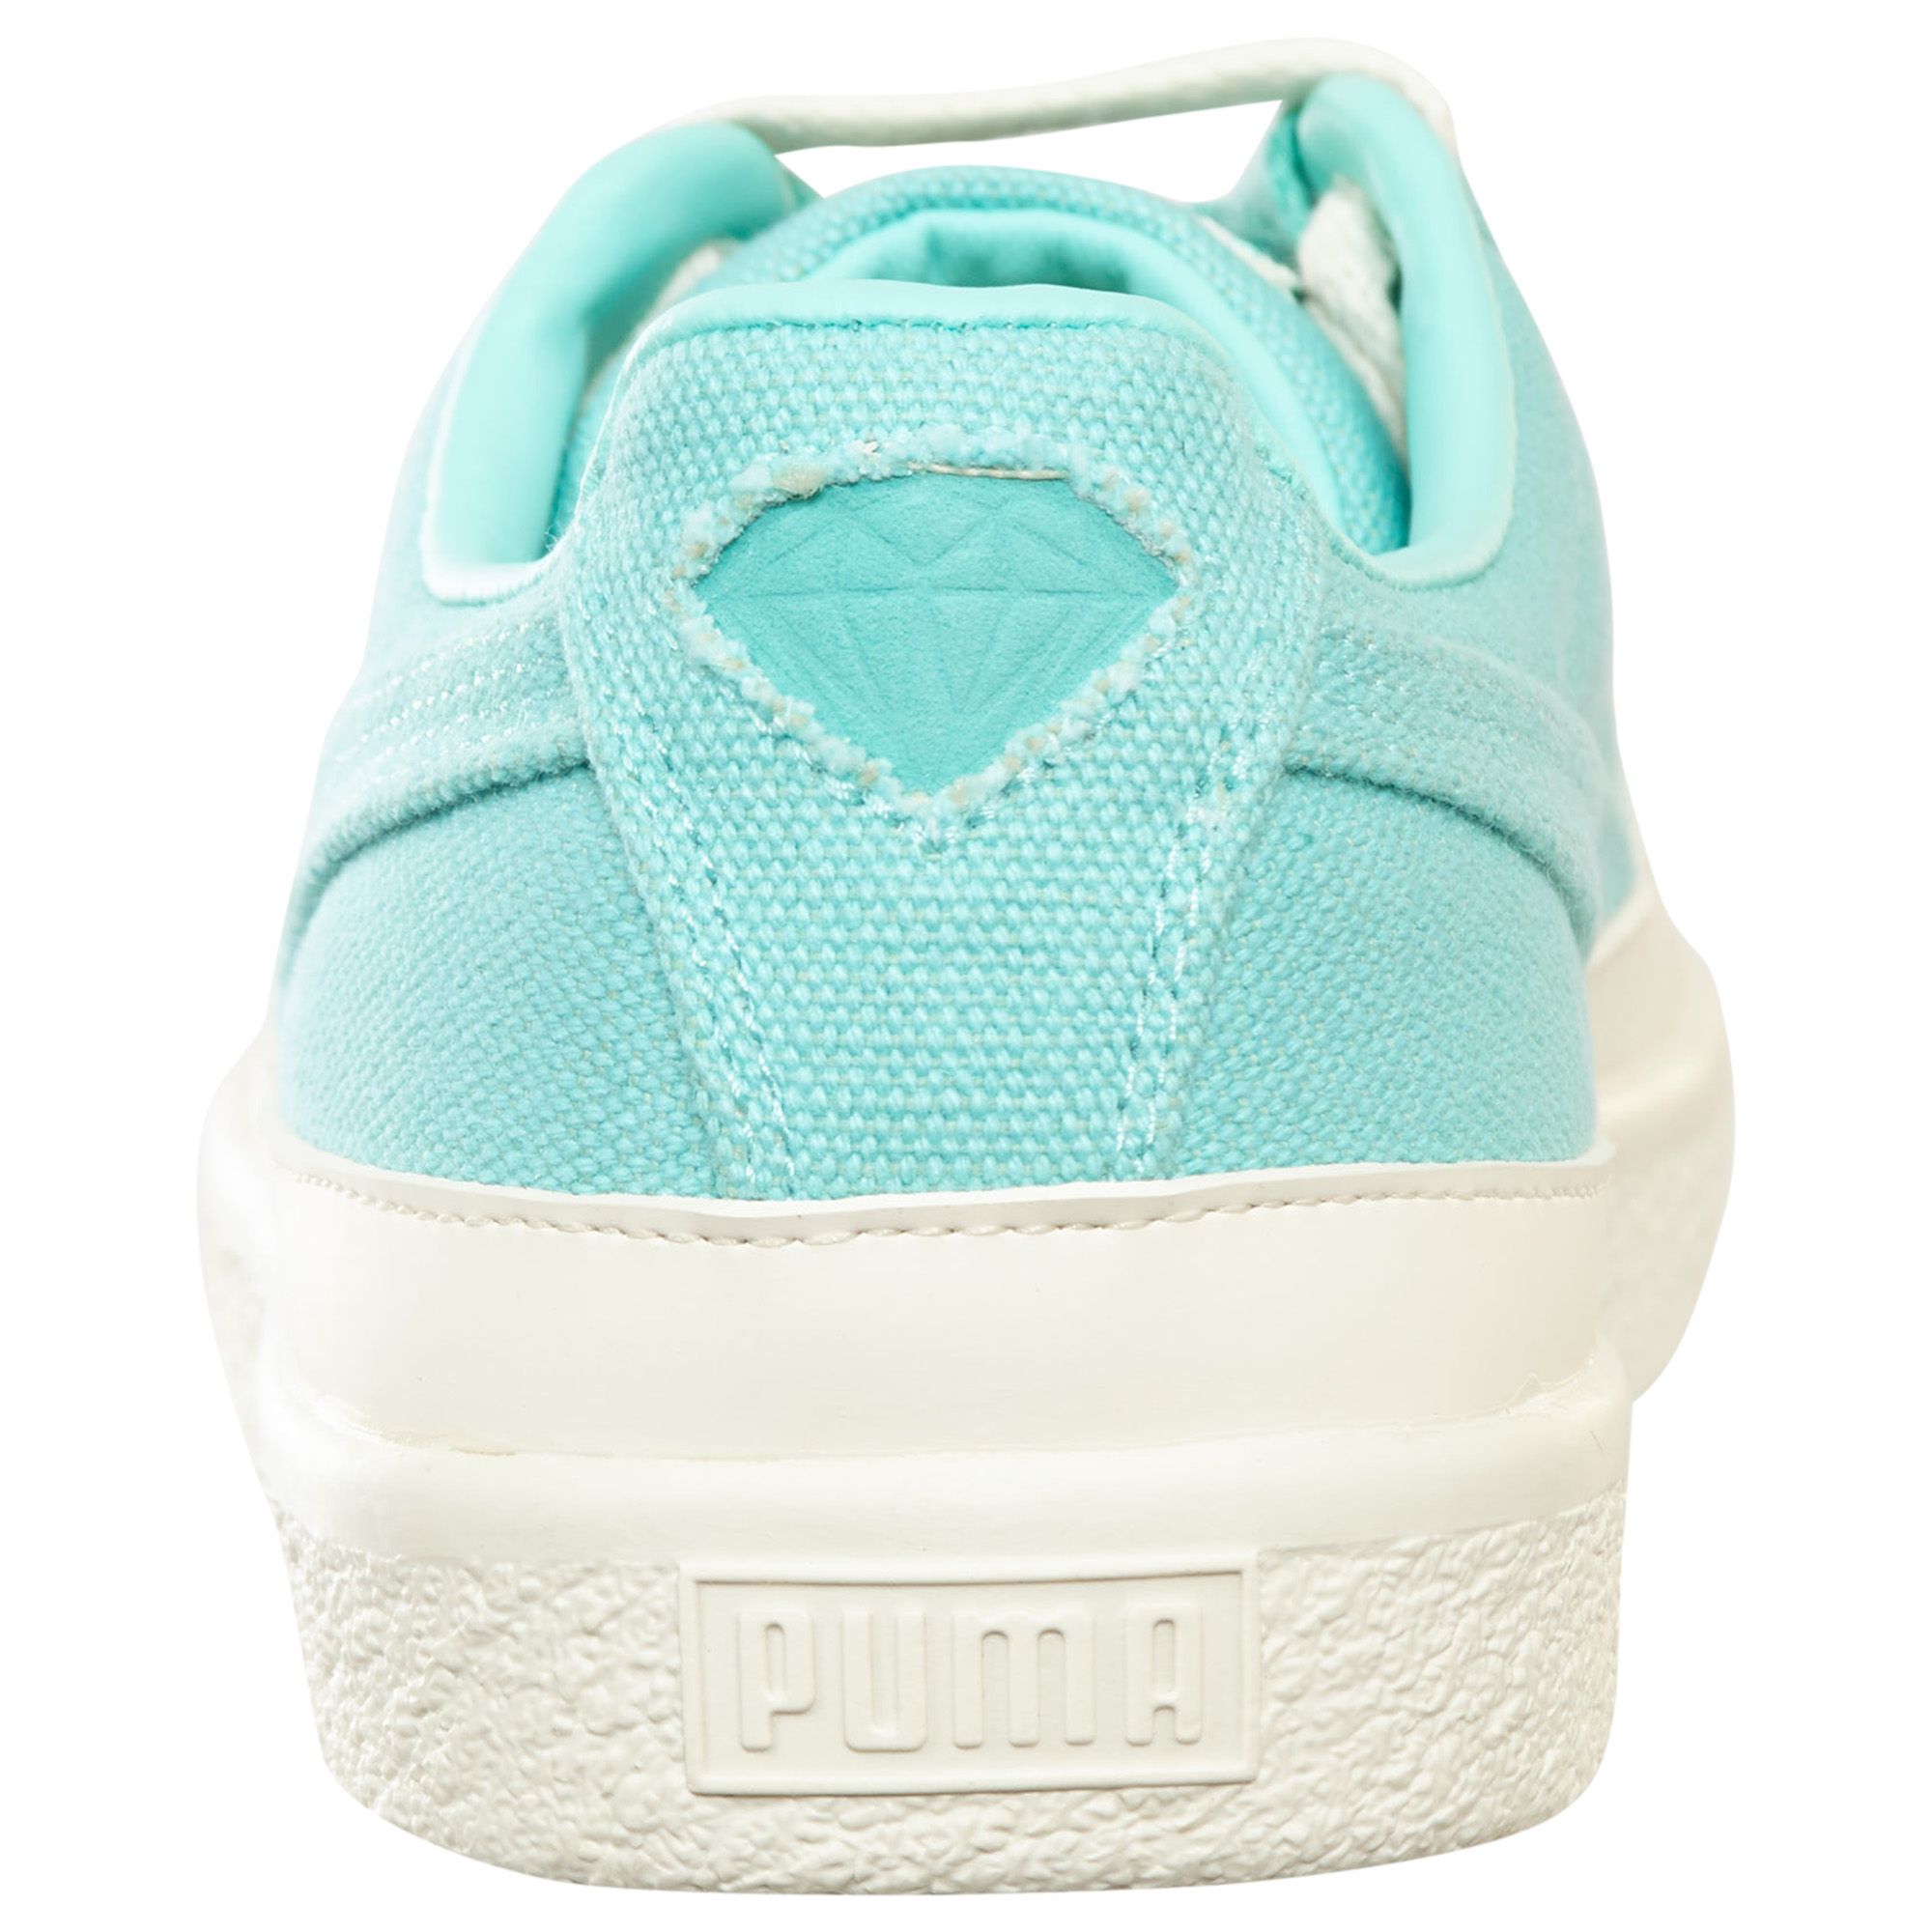 puma clyde turquoise